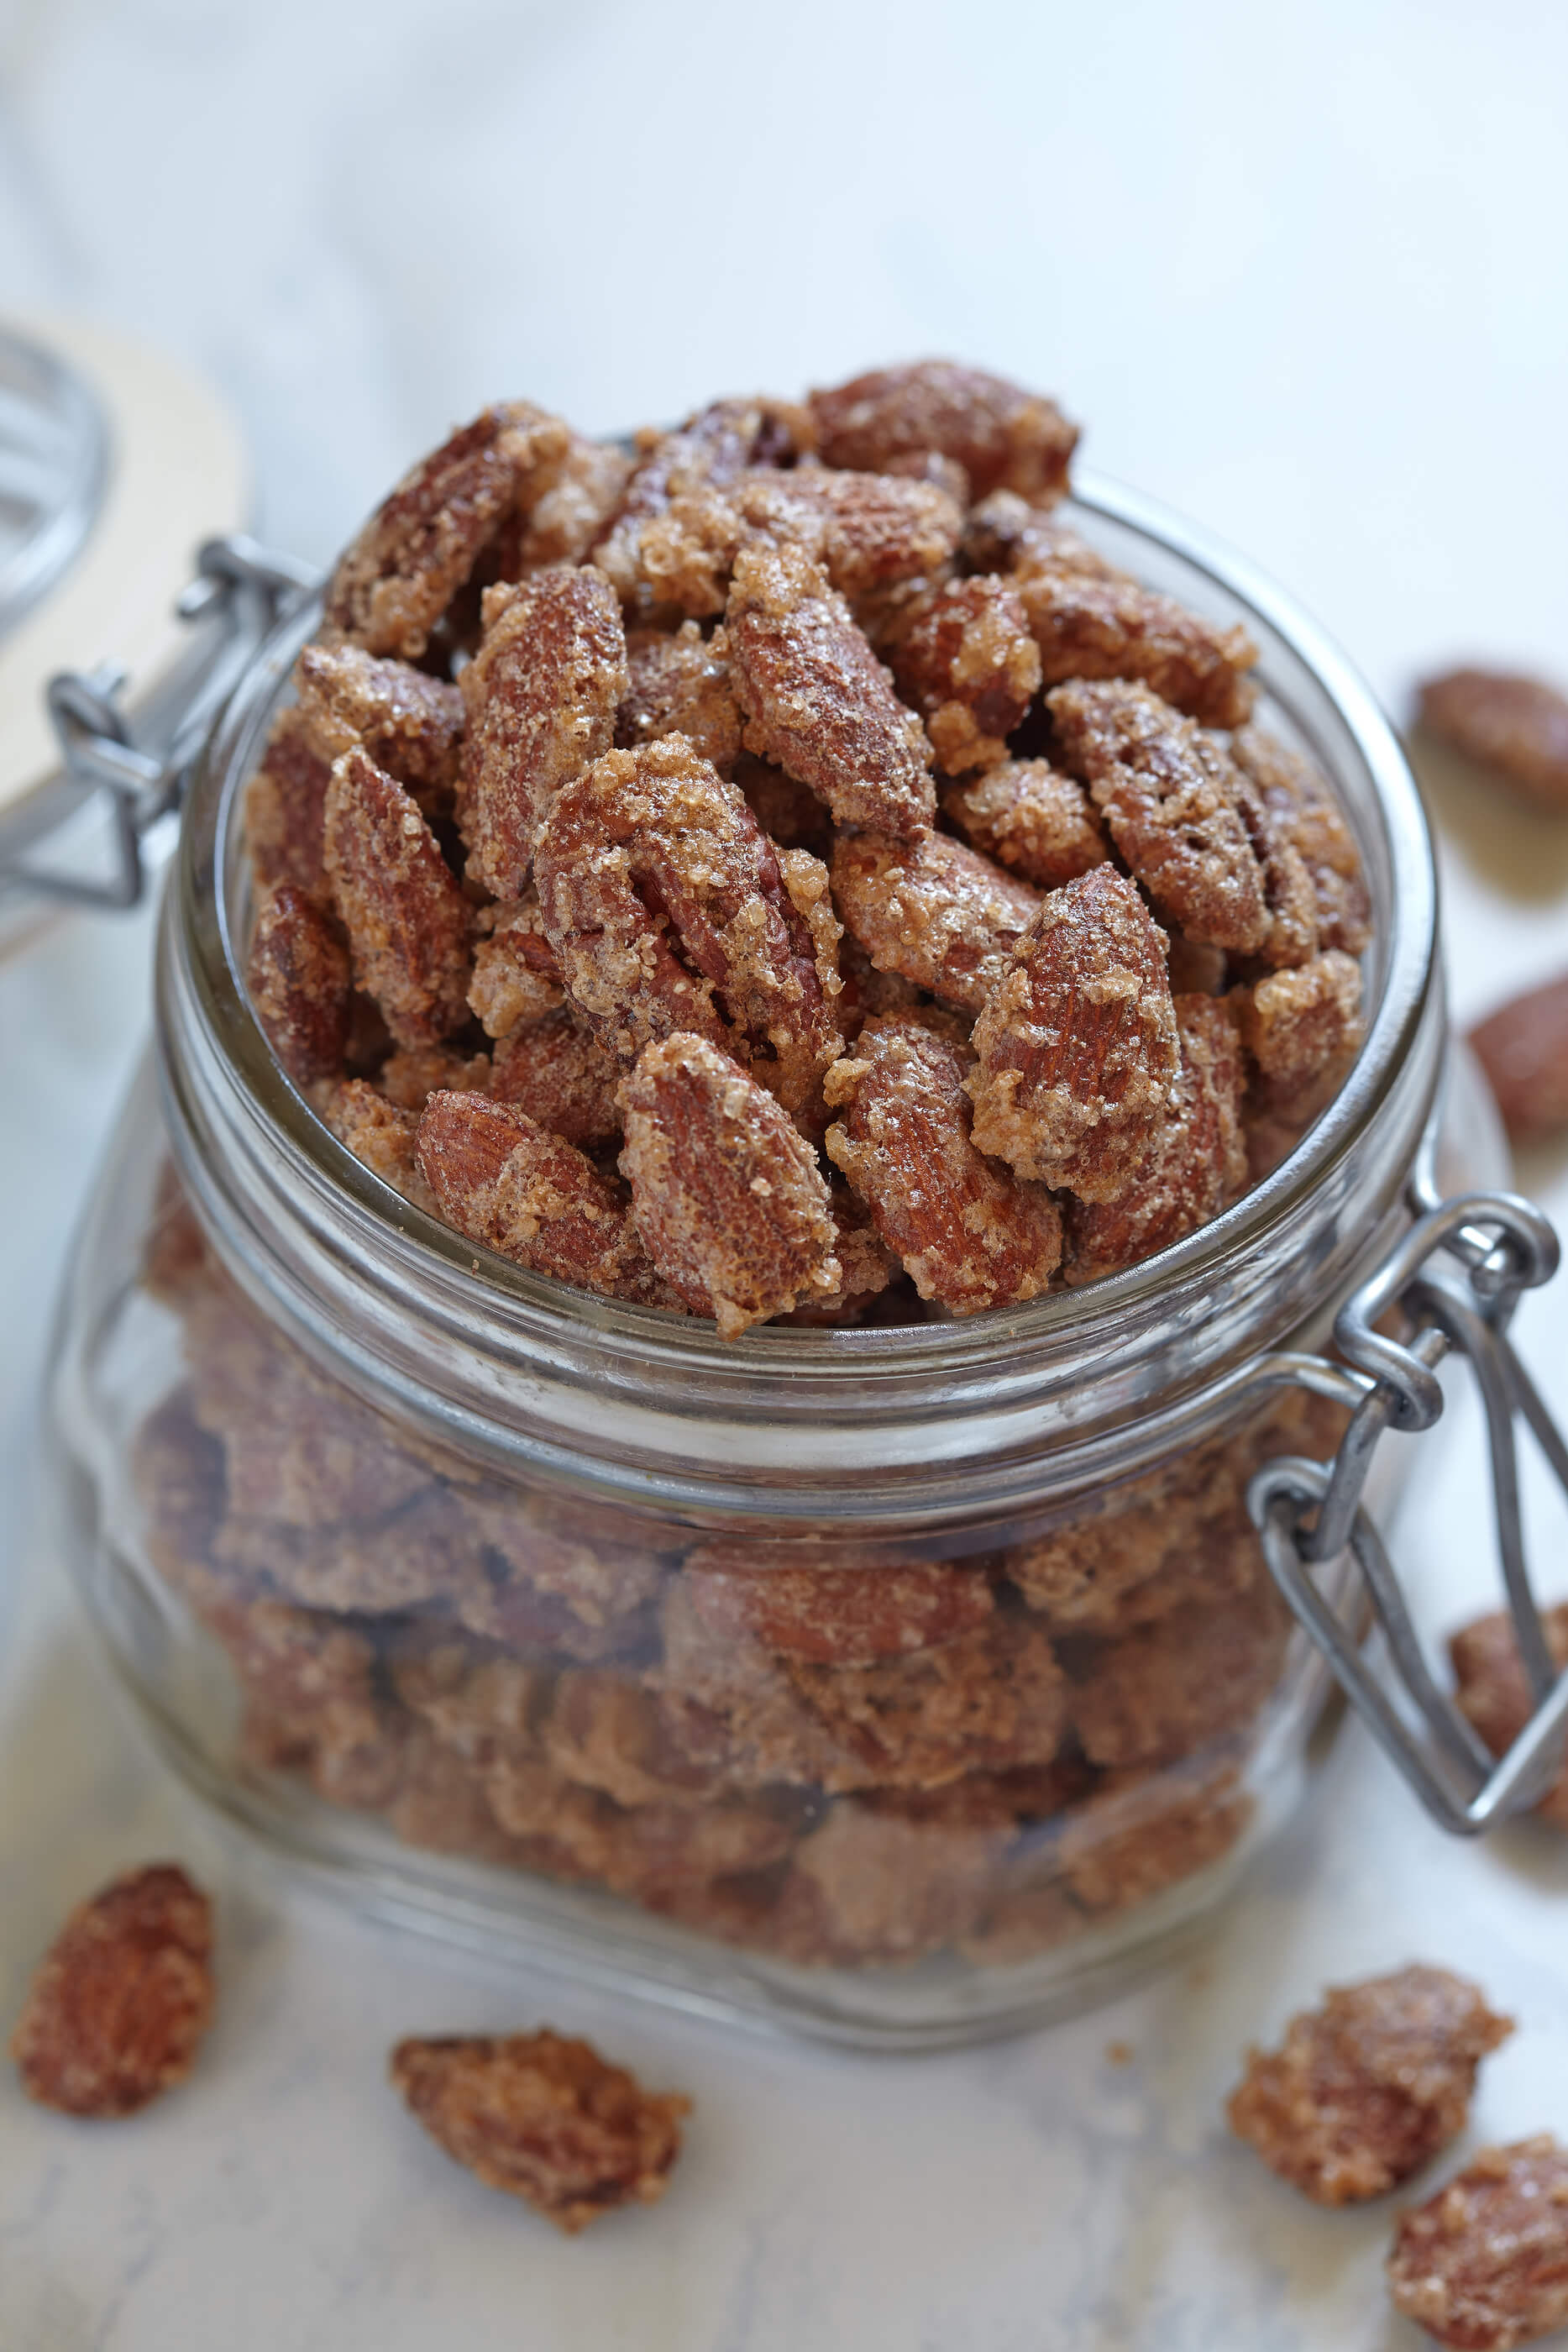 I have a baking addiction, but when it comes to gifts, not much comes close to these Trim Healthy Mama Spiced Pecans. Wrap them up in little gift bags and you have an easy & affordable Christmas gift!